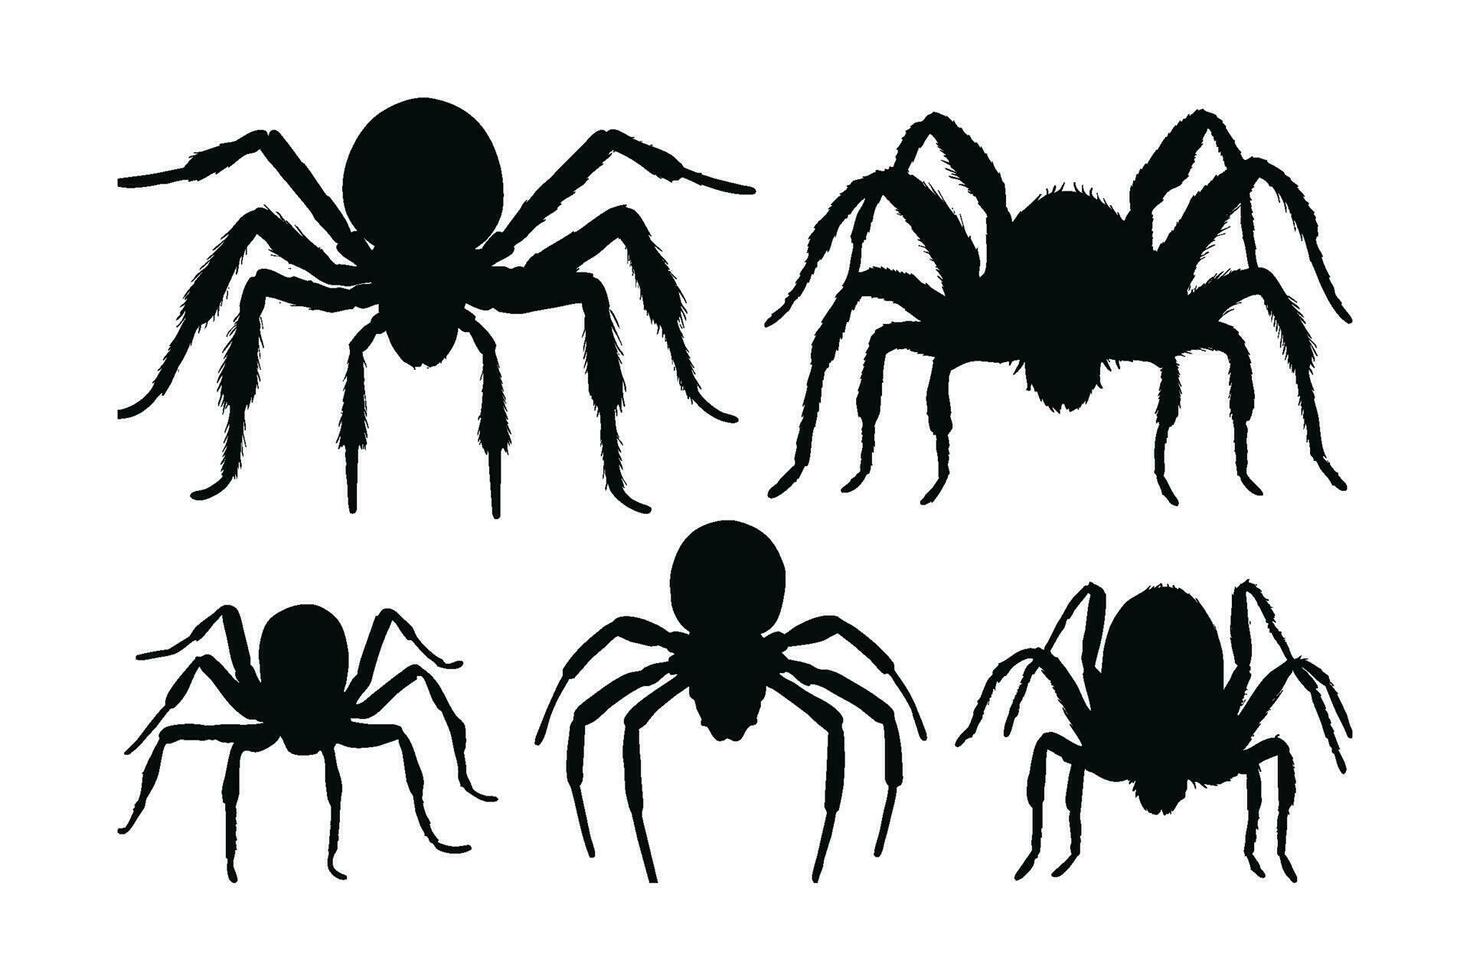 Spider walking silhouette bundle design. Wild spider vector design on a white background. Dangerous insects walking silhouette set vector. small insects in different positions silhouette collection.